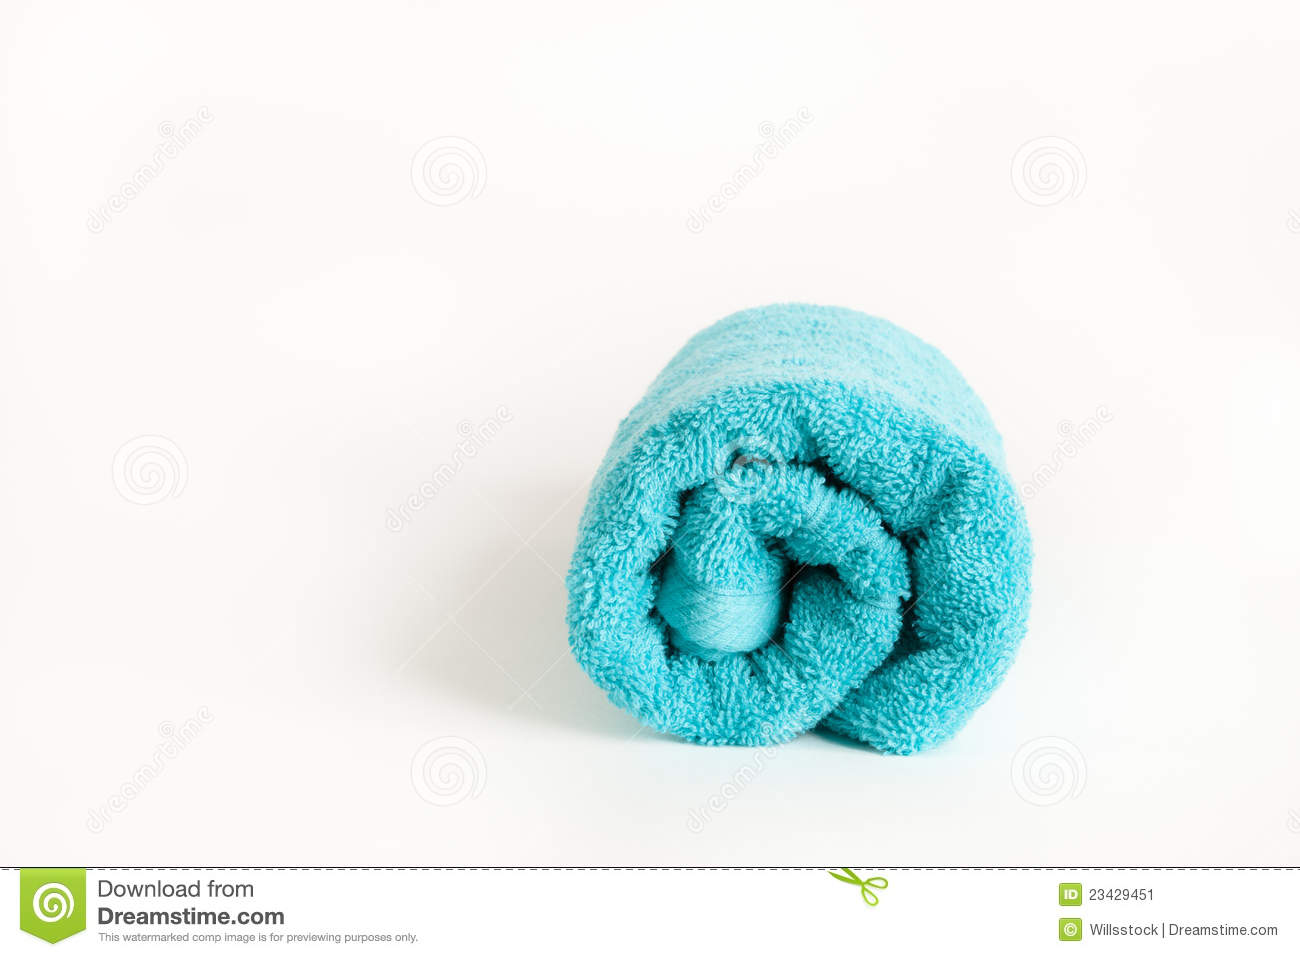 More Similar Stock Images Of   Rolled Up Blue Towel  